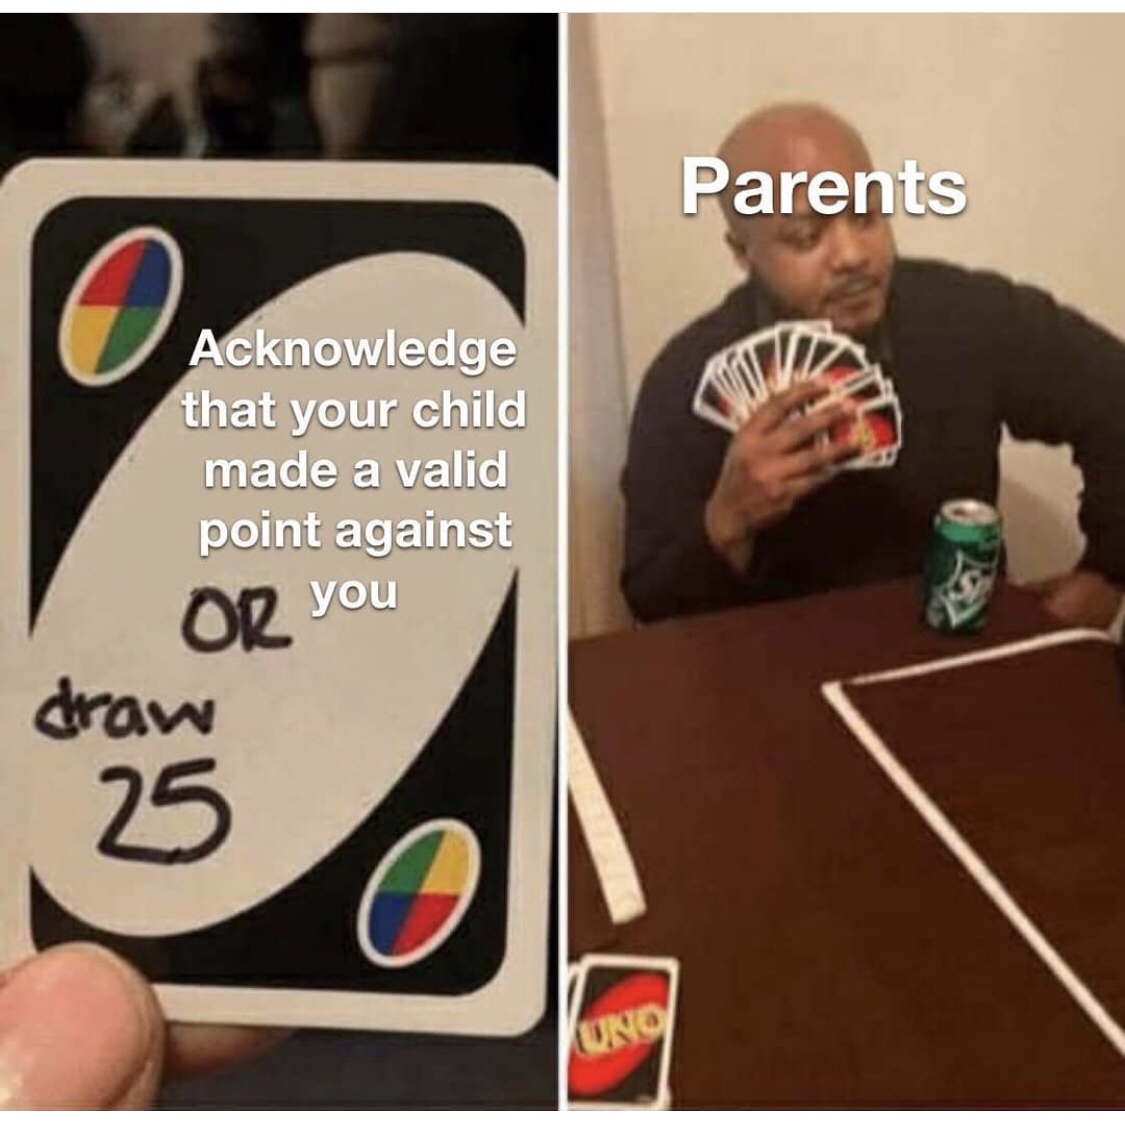 Internet meme - Parents Acknowledge that your child made a valid point against Op you draw 25